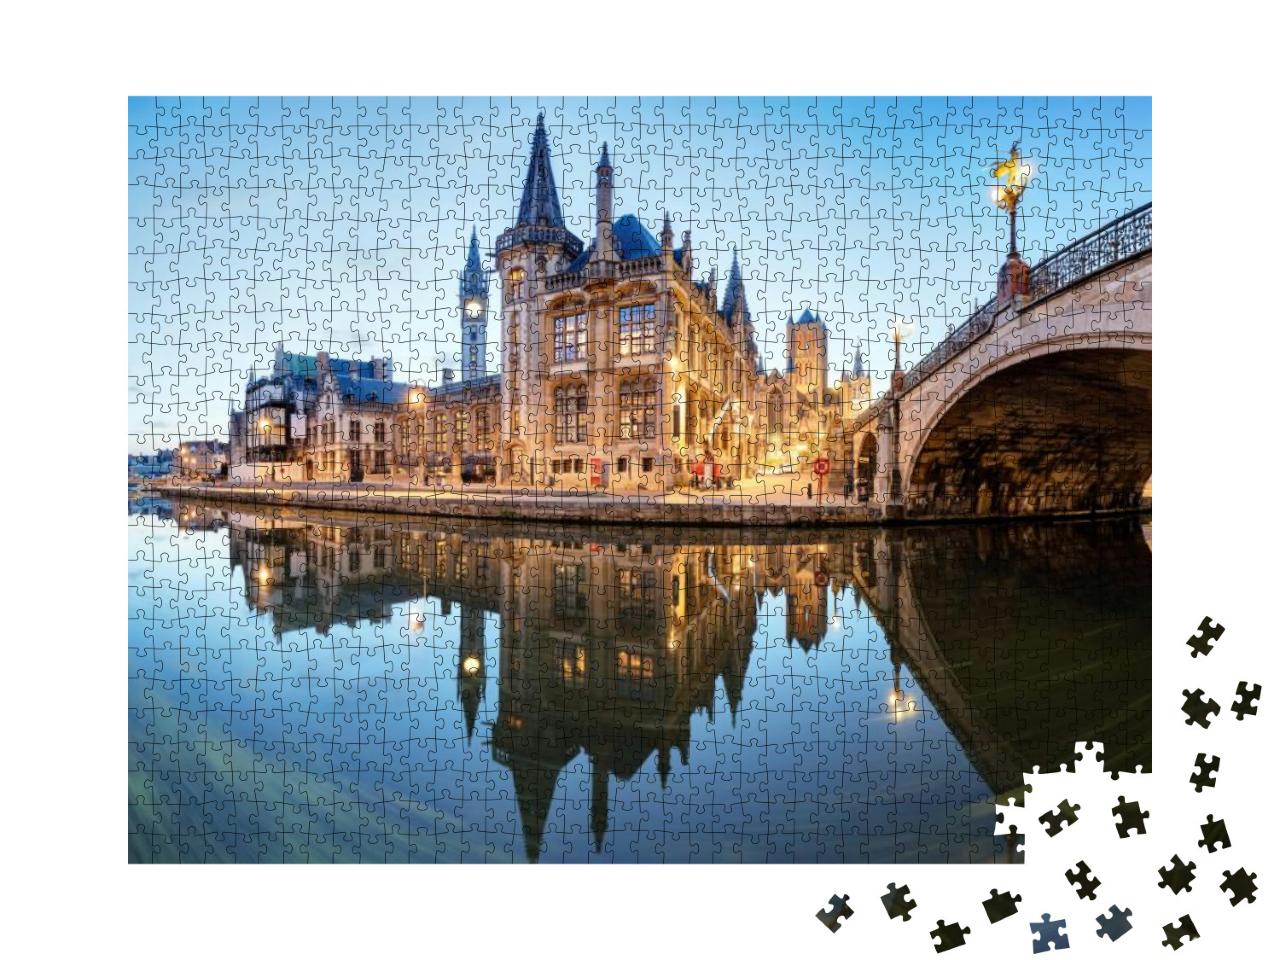 Ghent, Belgium During Night, Gent Old Town... Jigsaw Puzzle with 1000 pieces